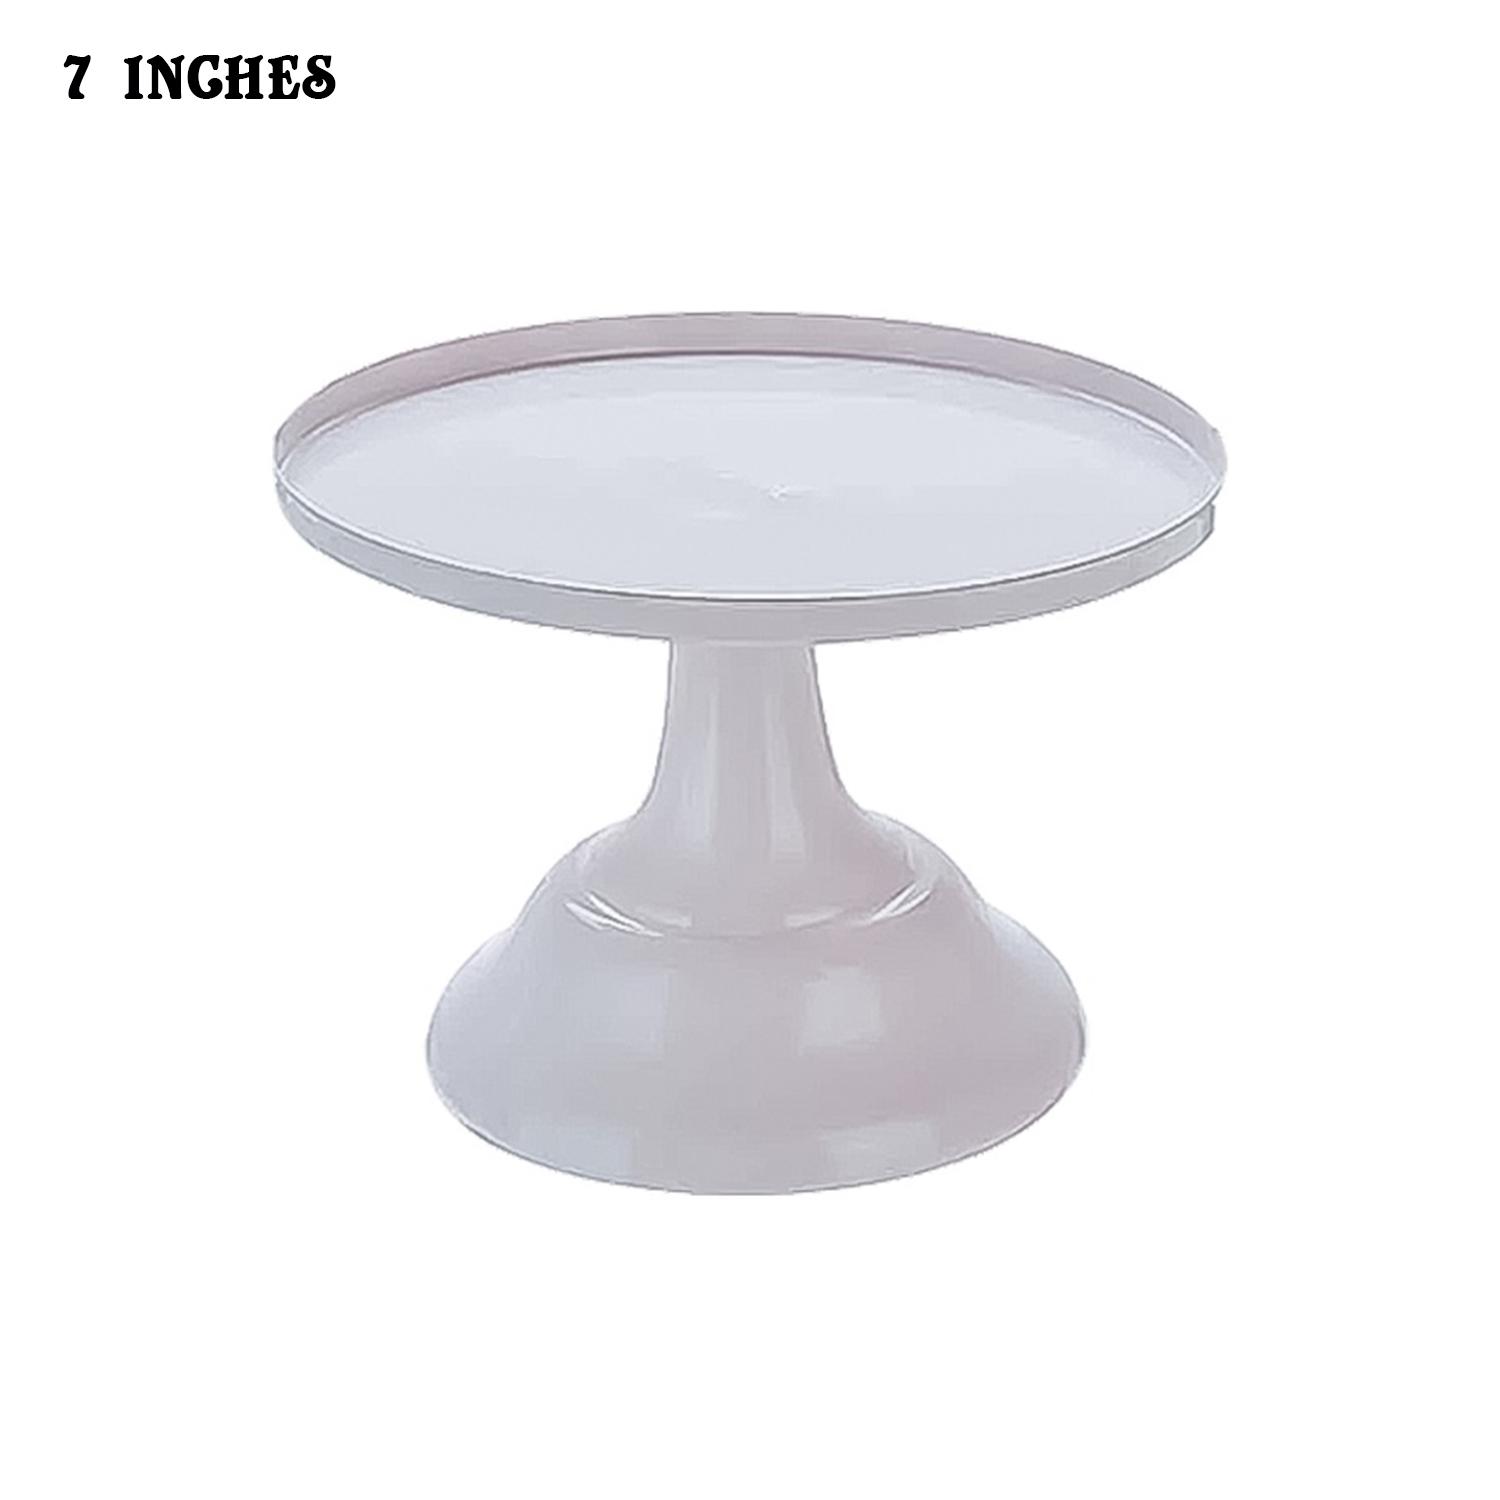 TICKLE ROUND CAKE STAND 7 INCHES